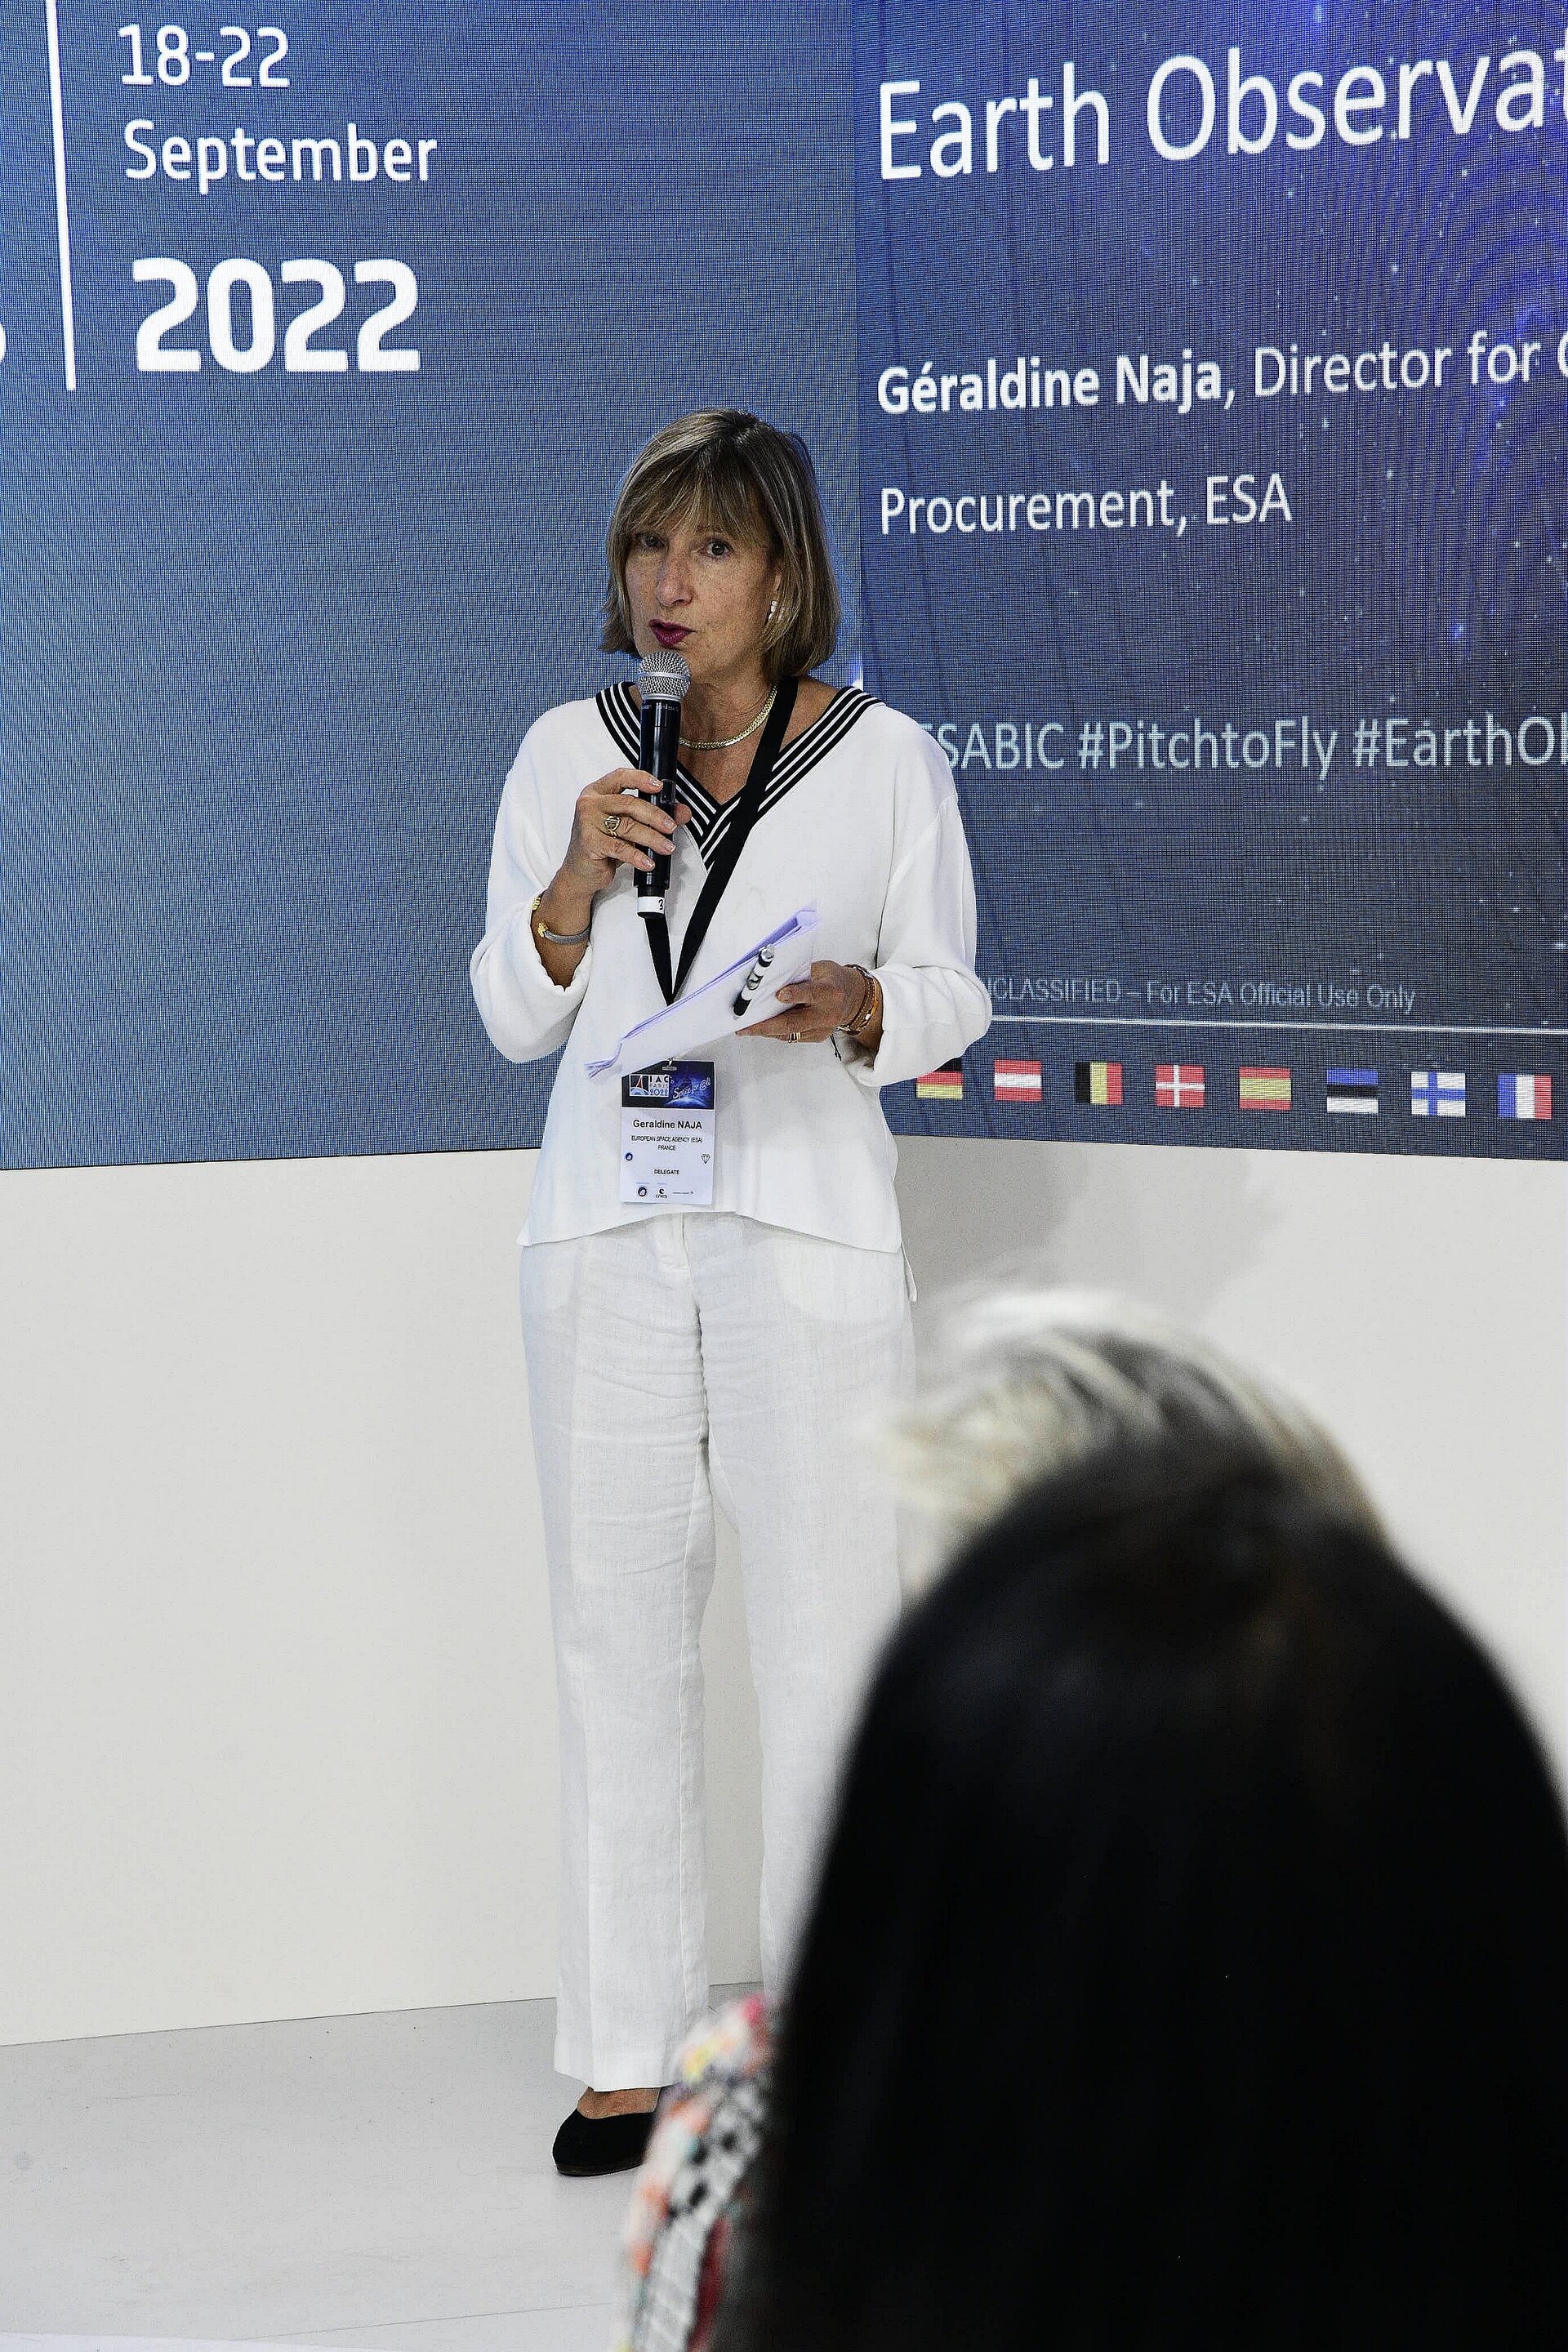 ESA's start-up competition at the IAC